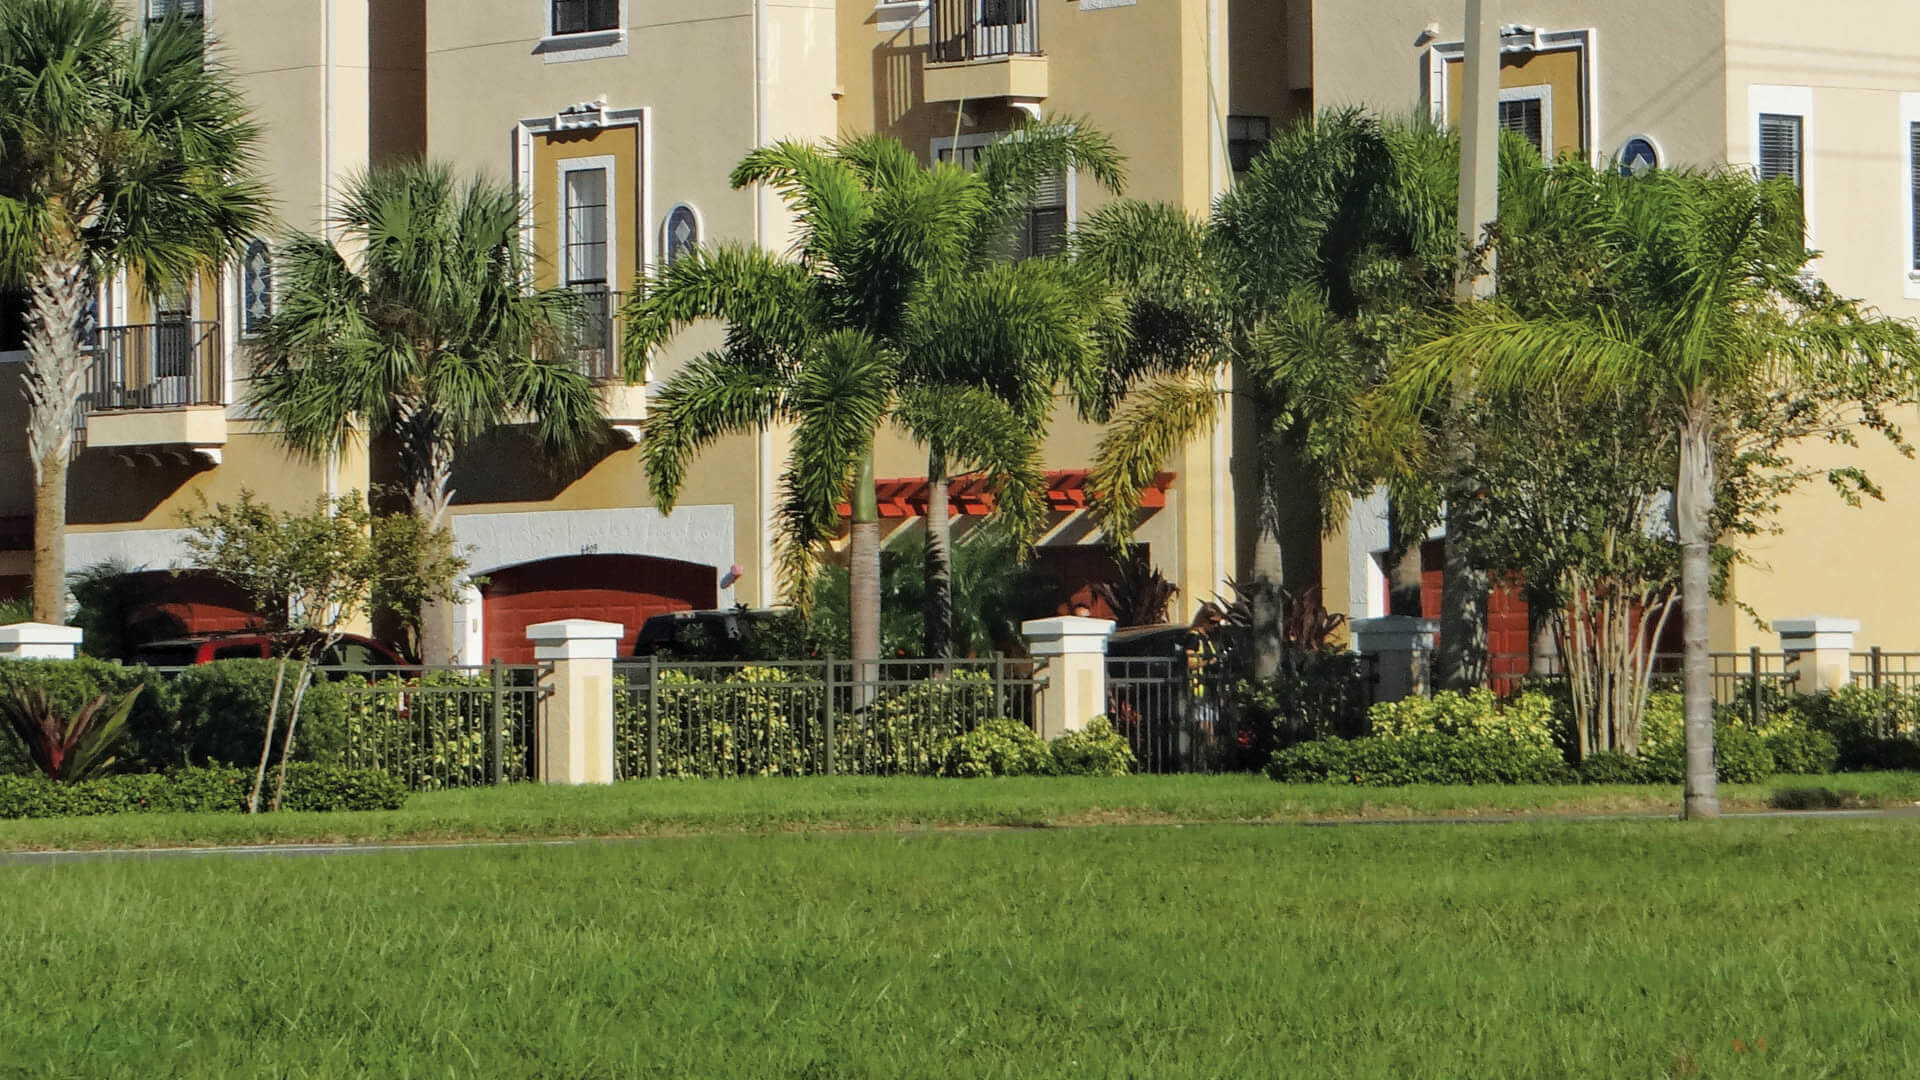 Condo complex in Davie, FL with healthy fertilized lawn and landscaping.